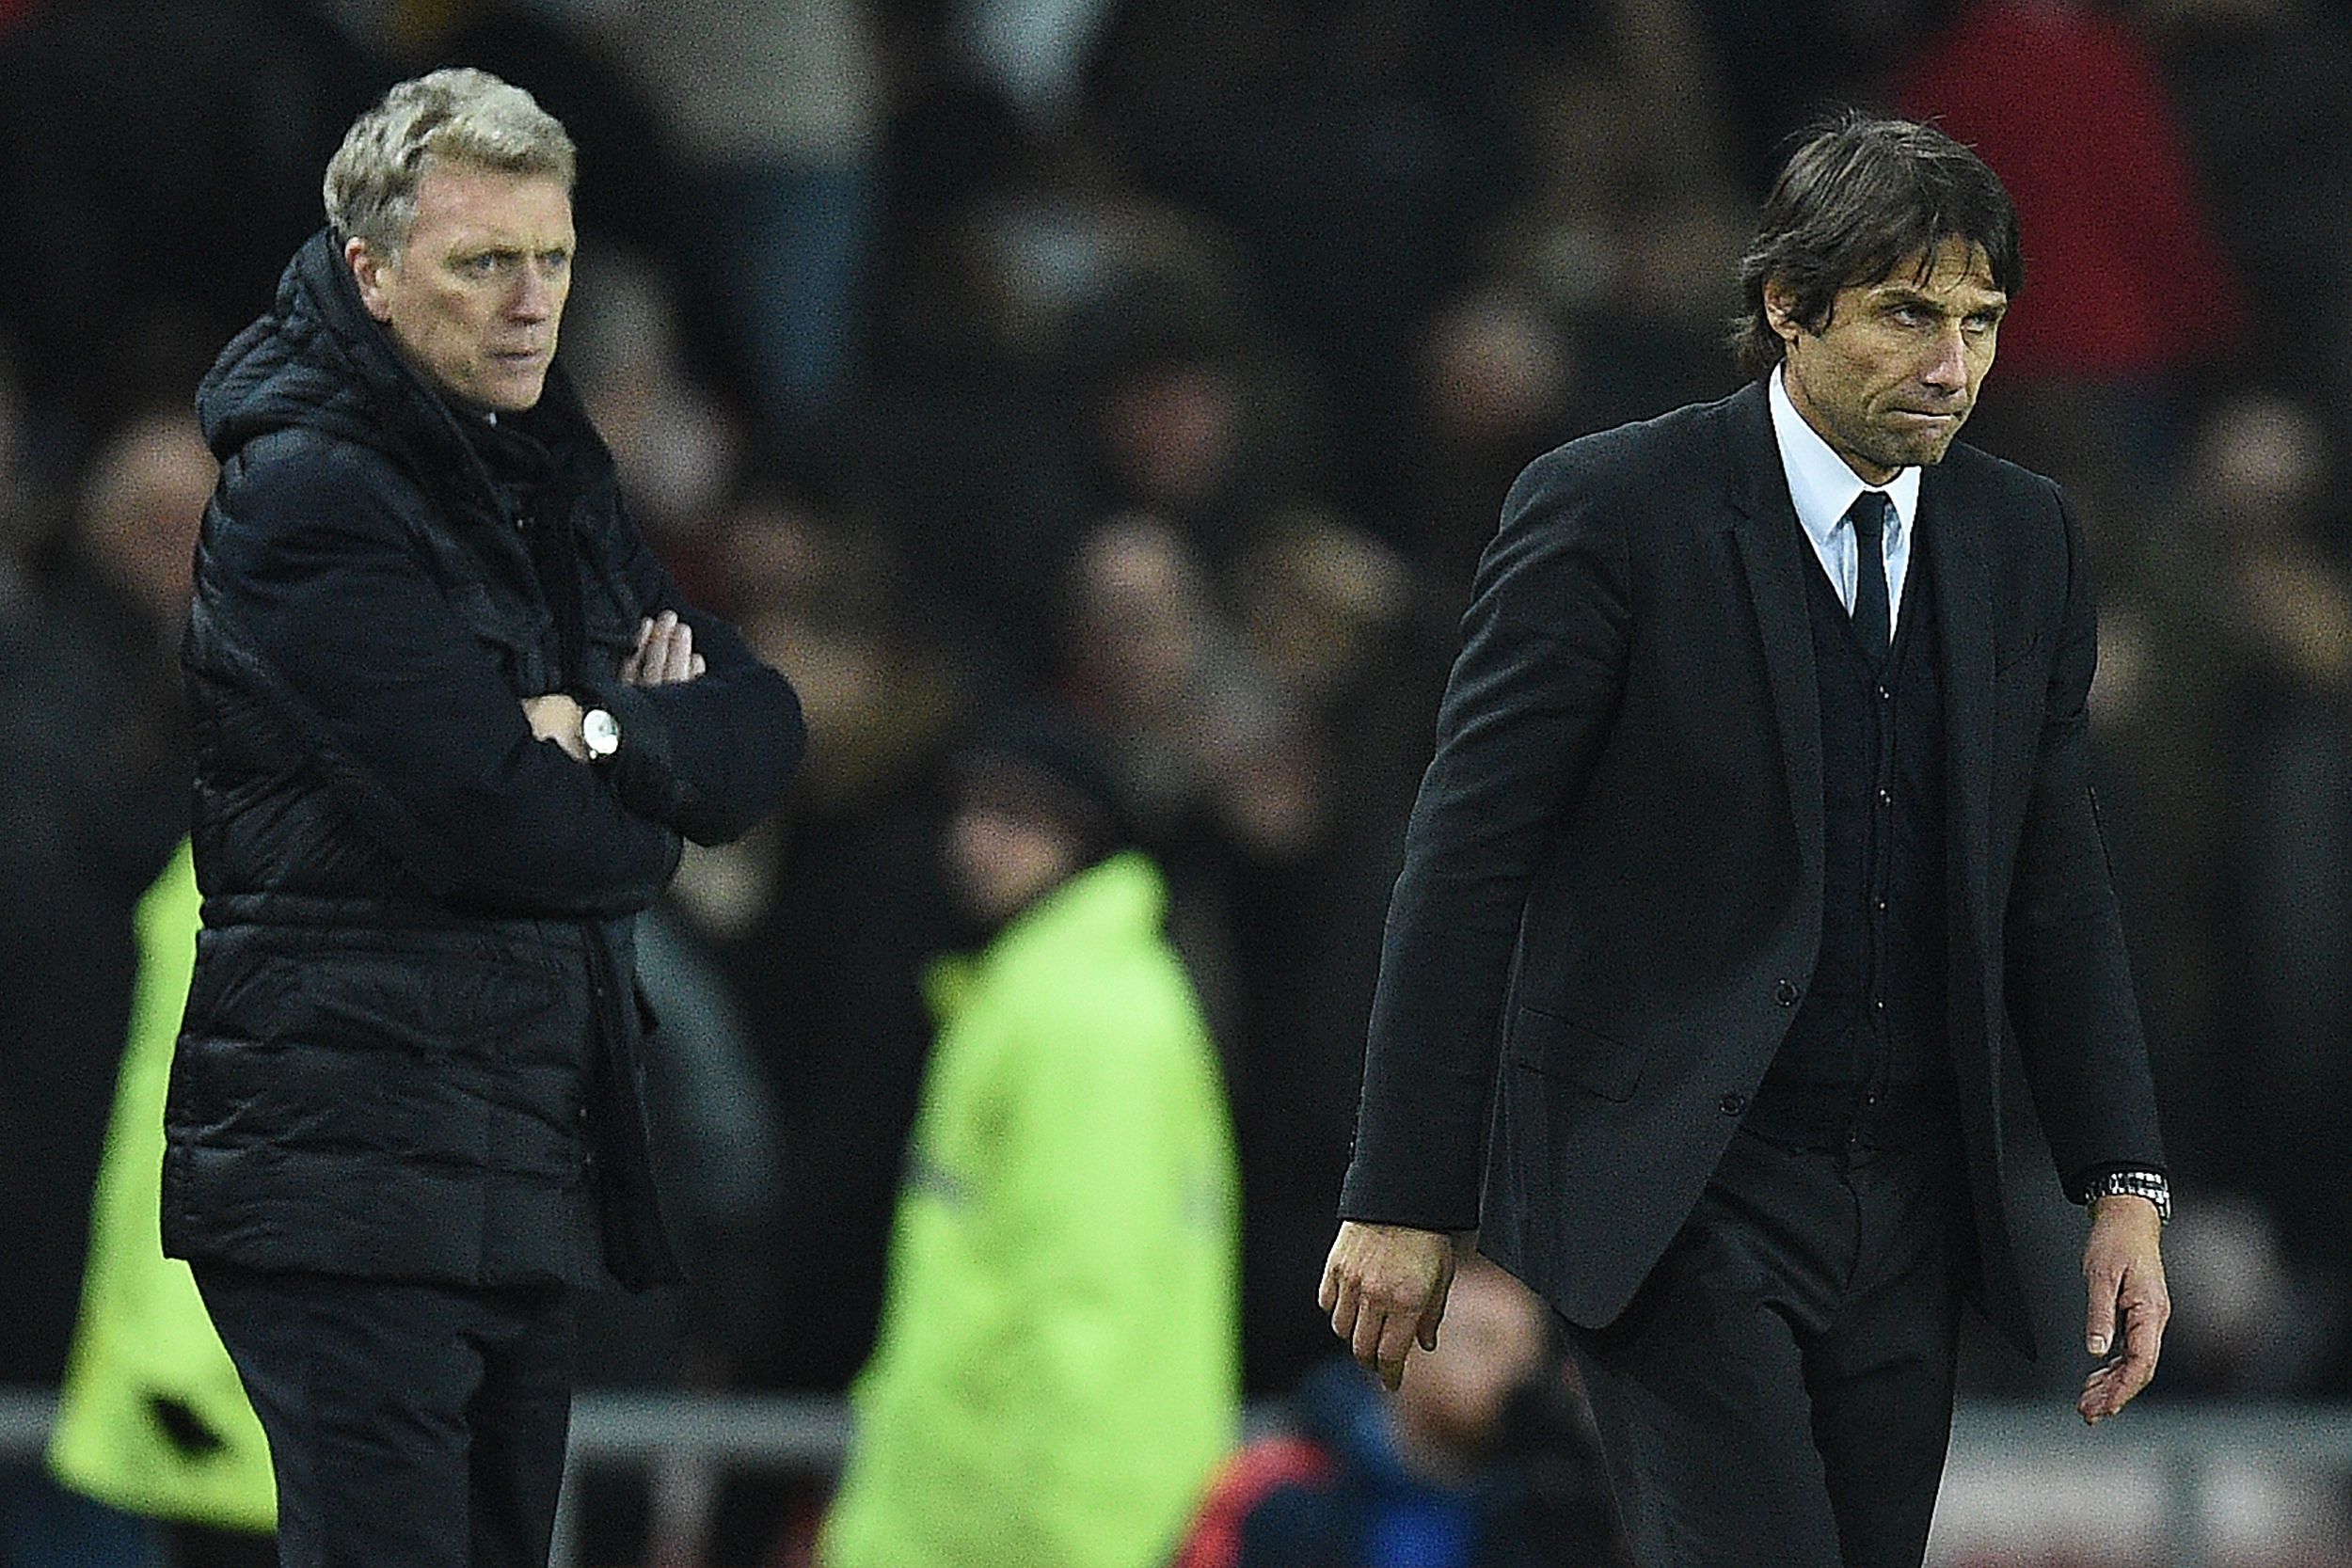 West Ham boss David Moyes makes bold claim which may upset Spurs and Man City